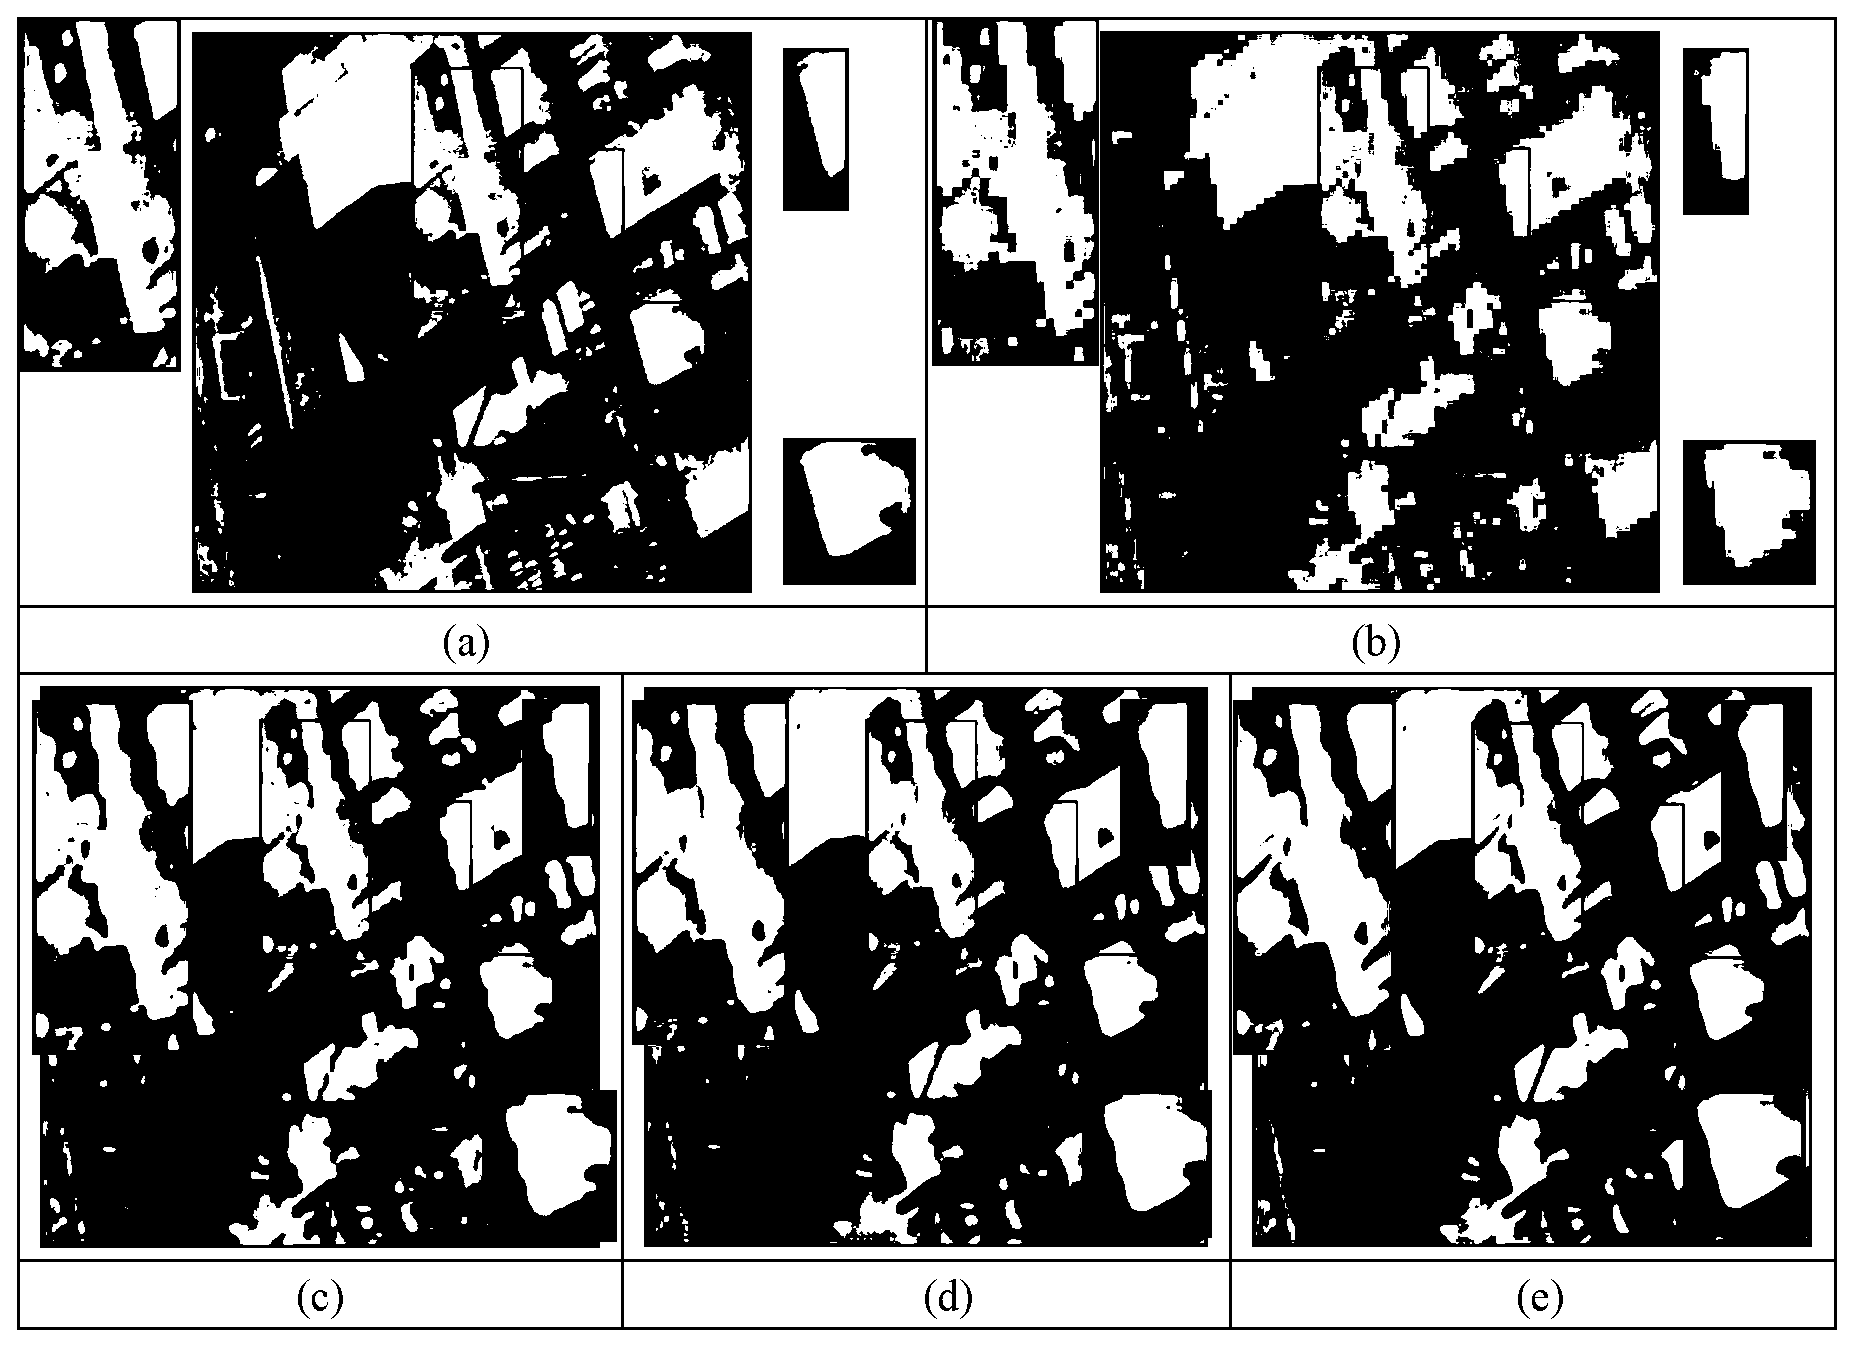 Super-resolution image reconstruction method based on non-local dictionary learning and biregular terms